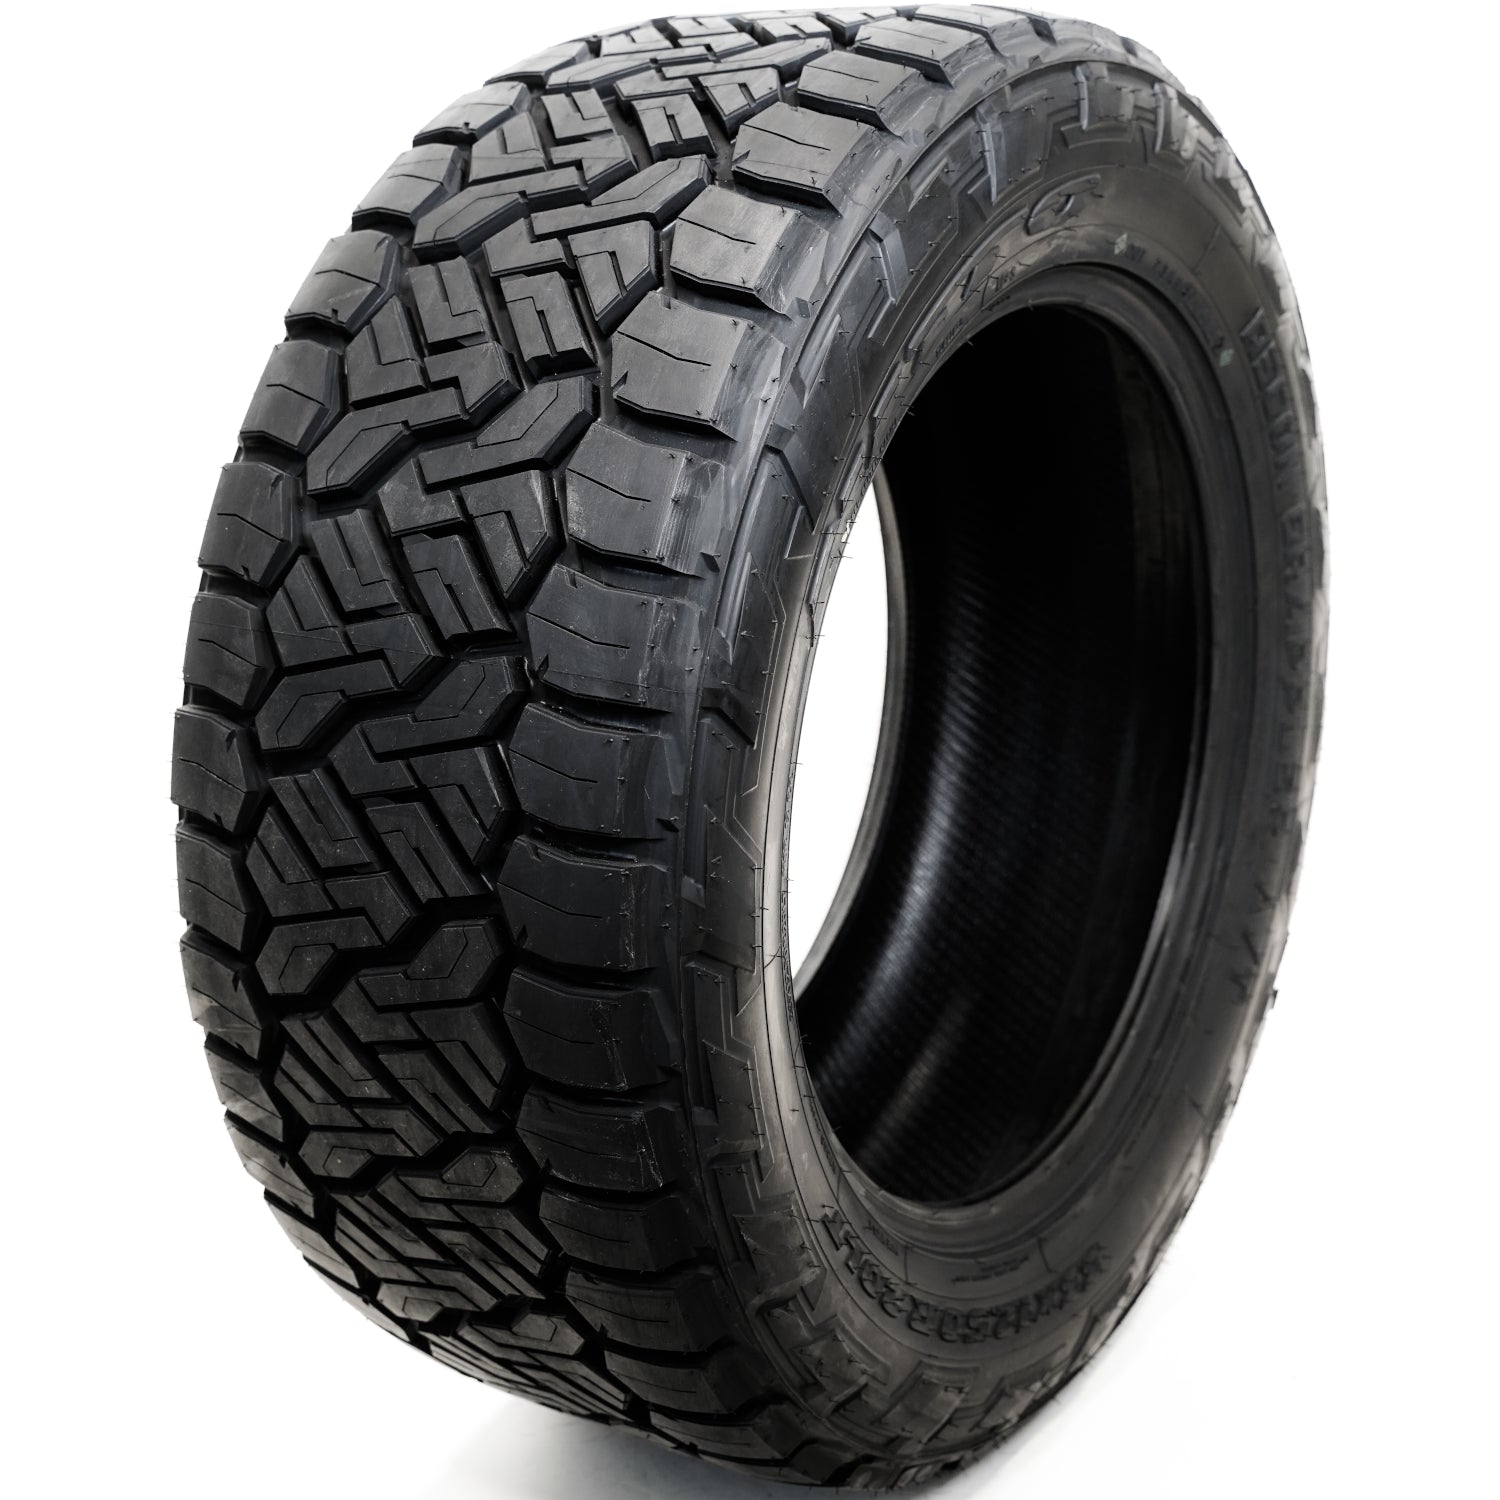 NITTO RECON GRAPPLER A/T 35X11.50R16LT Tires